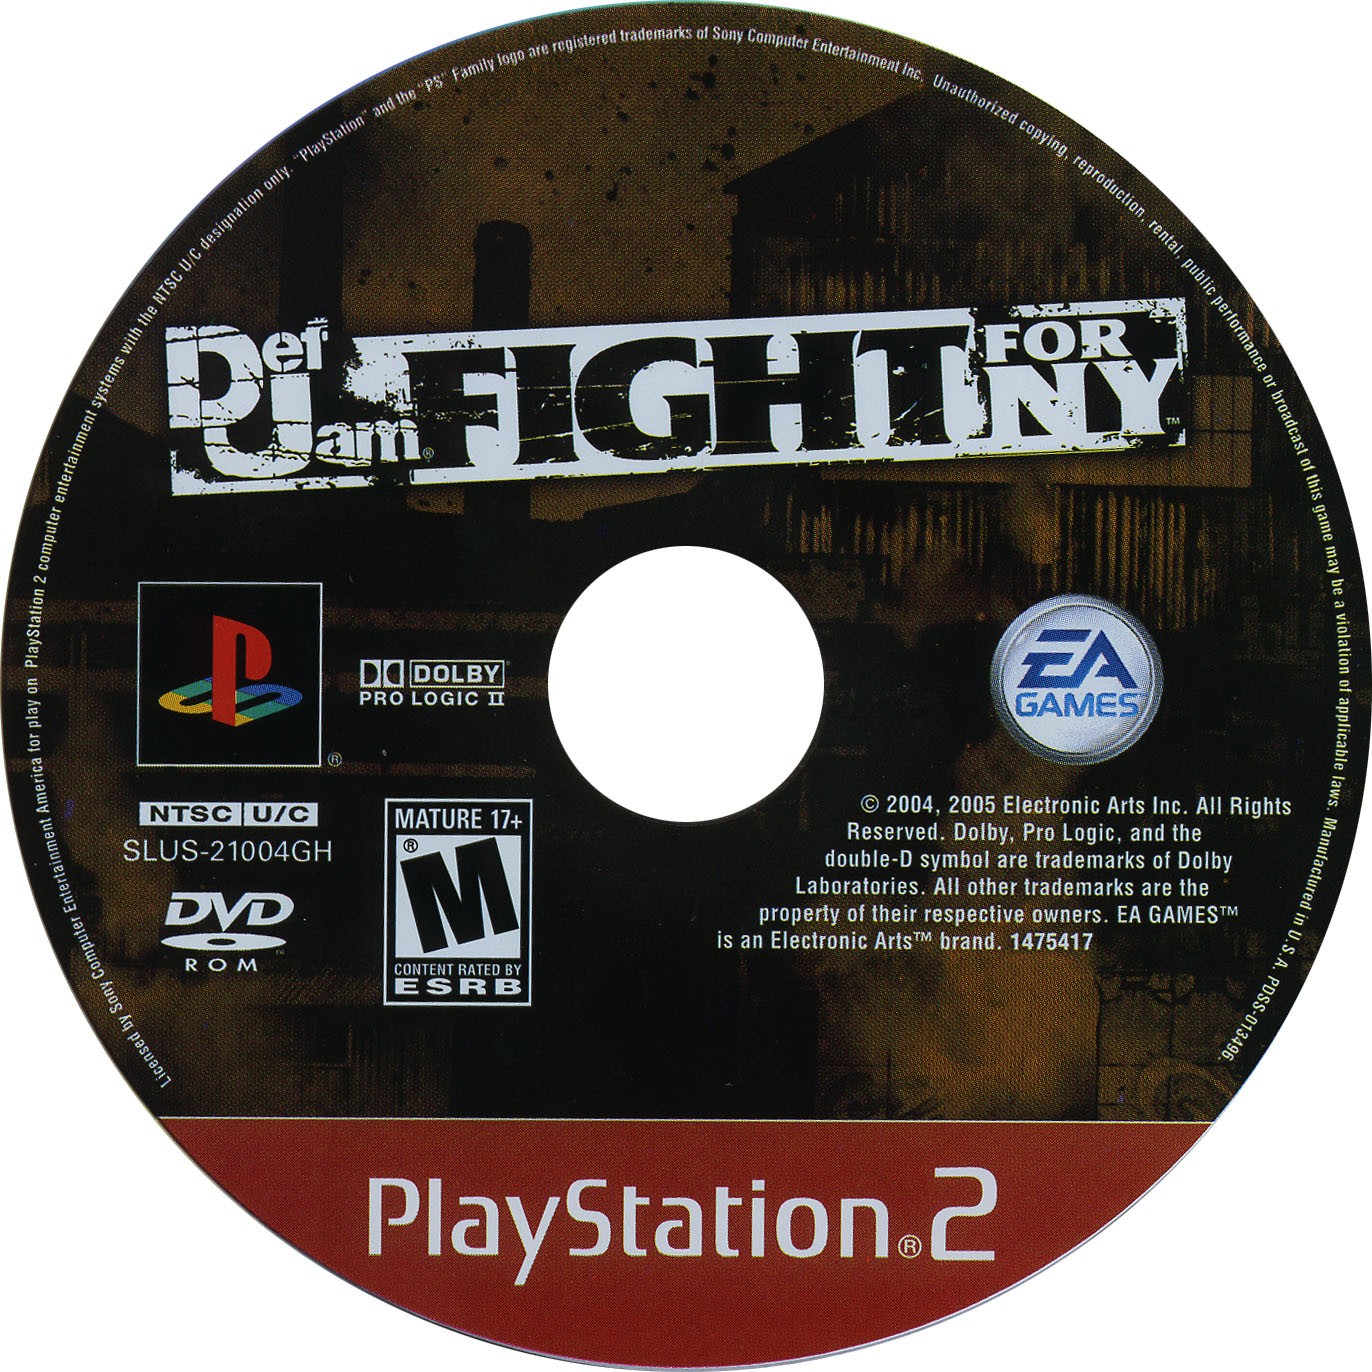 Def Jam: Fight for NY NTSC-J (Japan) Video Games for sale